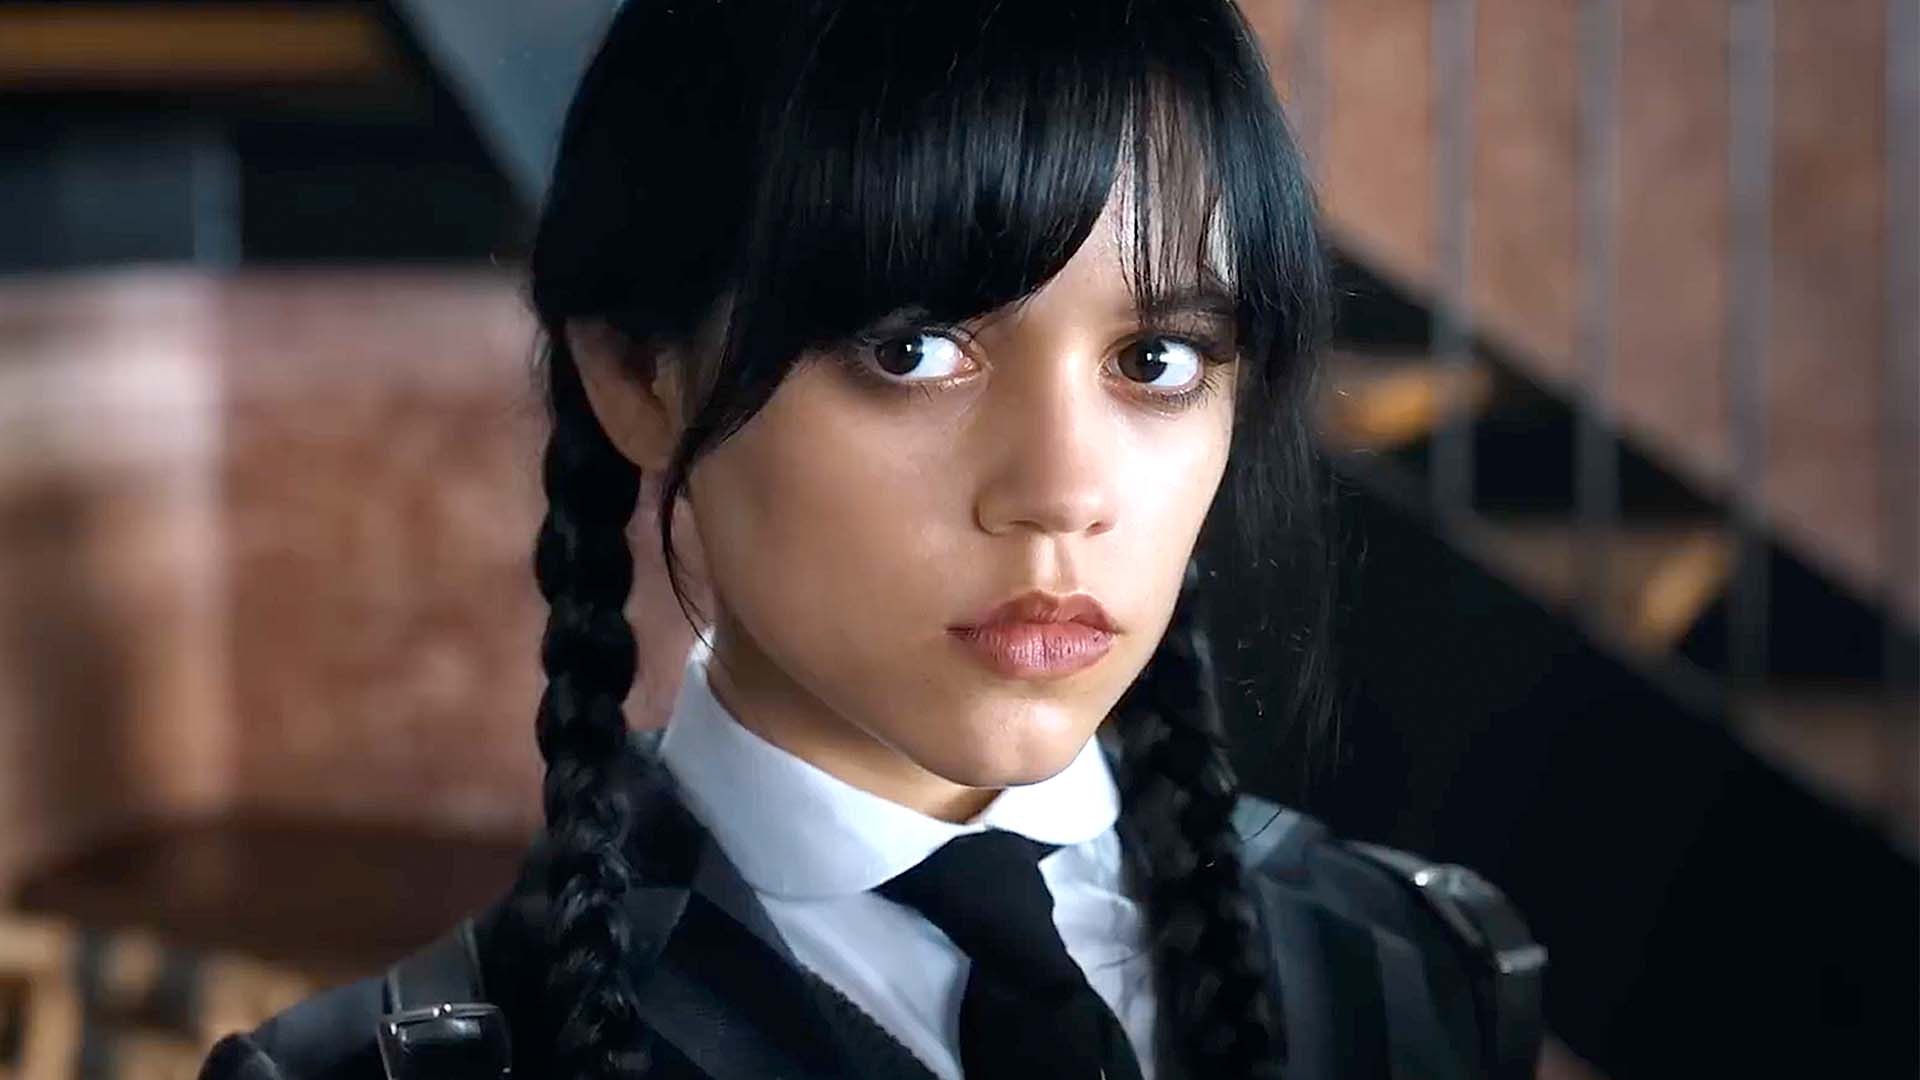 Jenna Ortega received rave reviews for her role as Wednesday Addams in the Netflix series